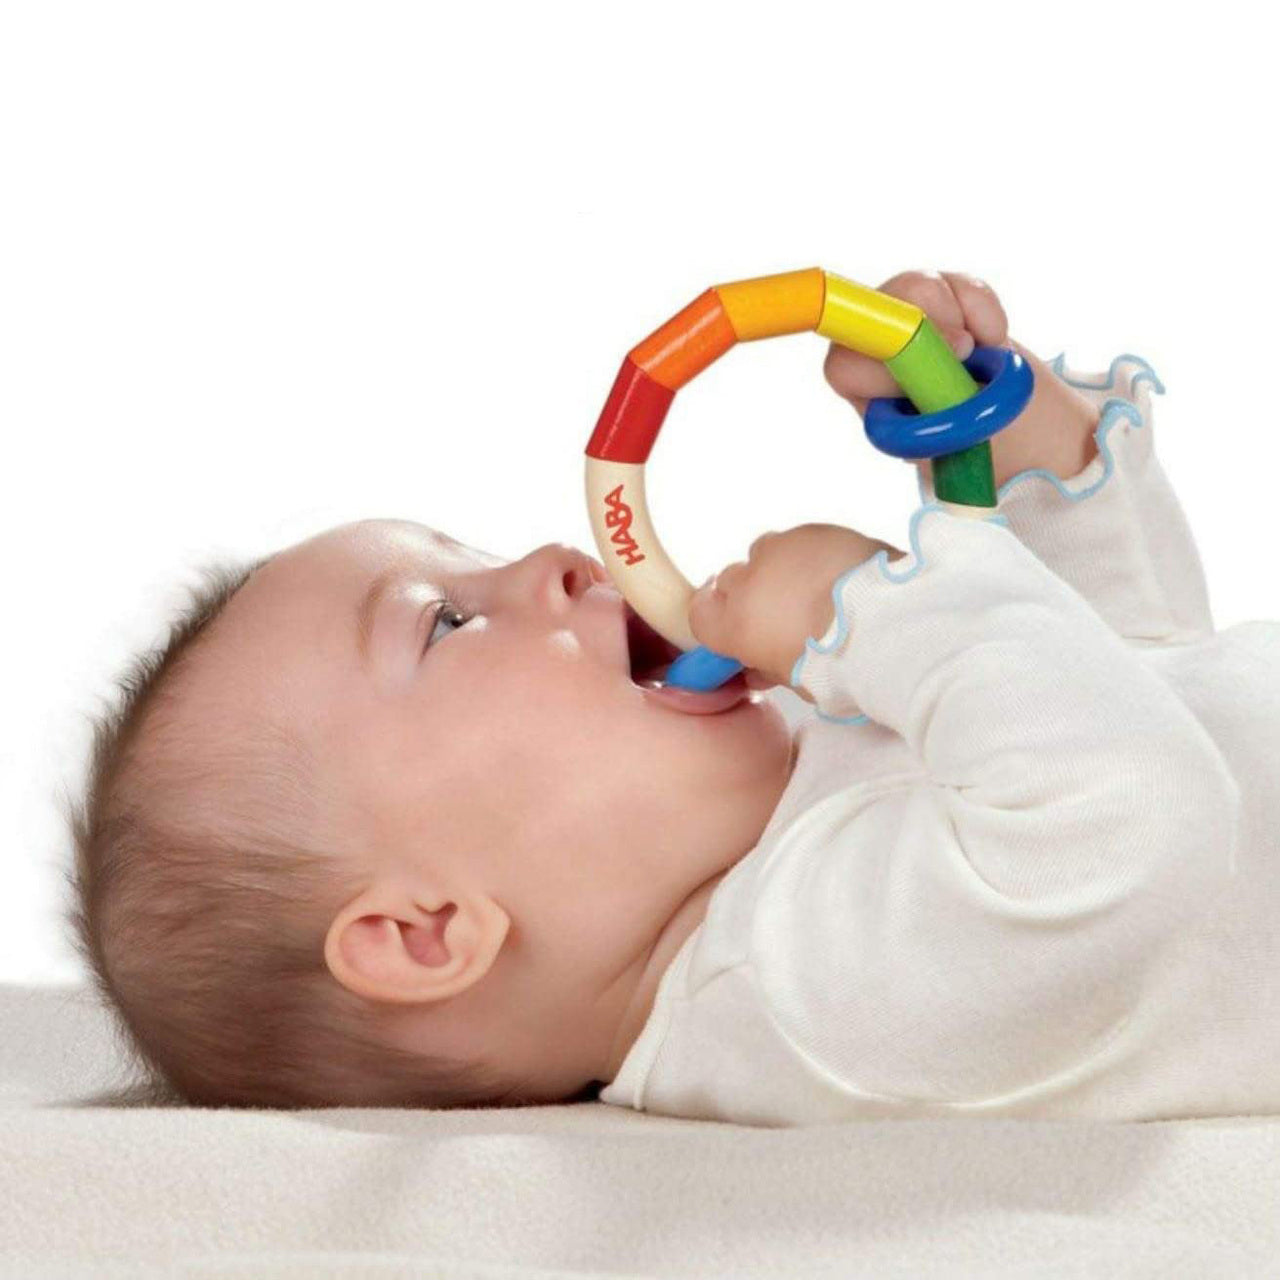 Baby chewing on Kringelring Teething Rattle by Haba